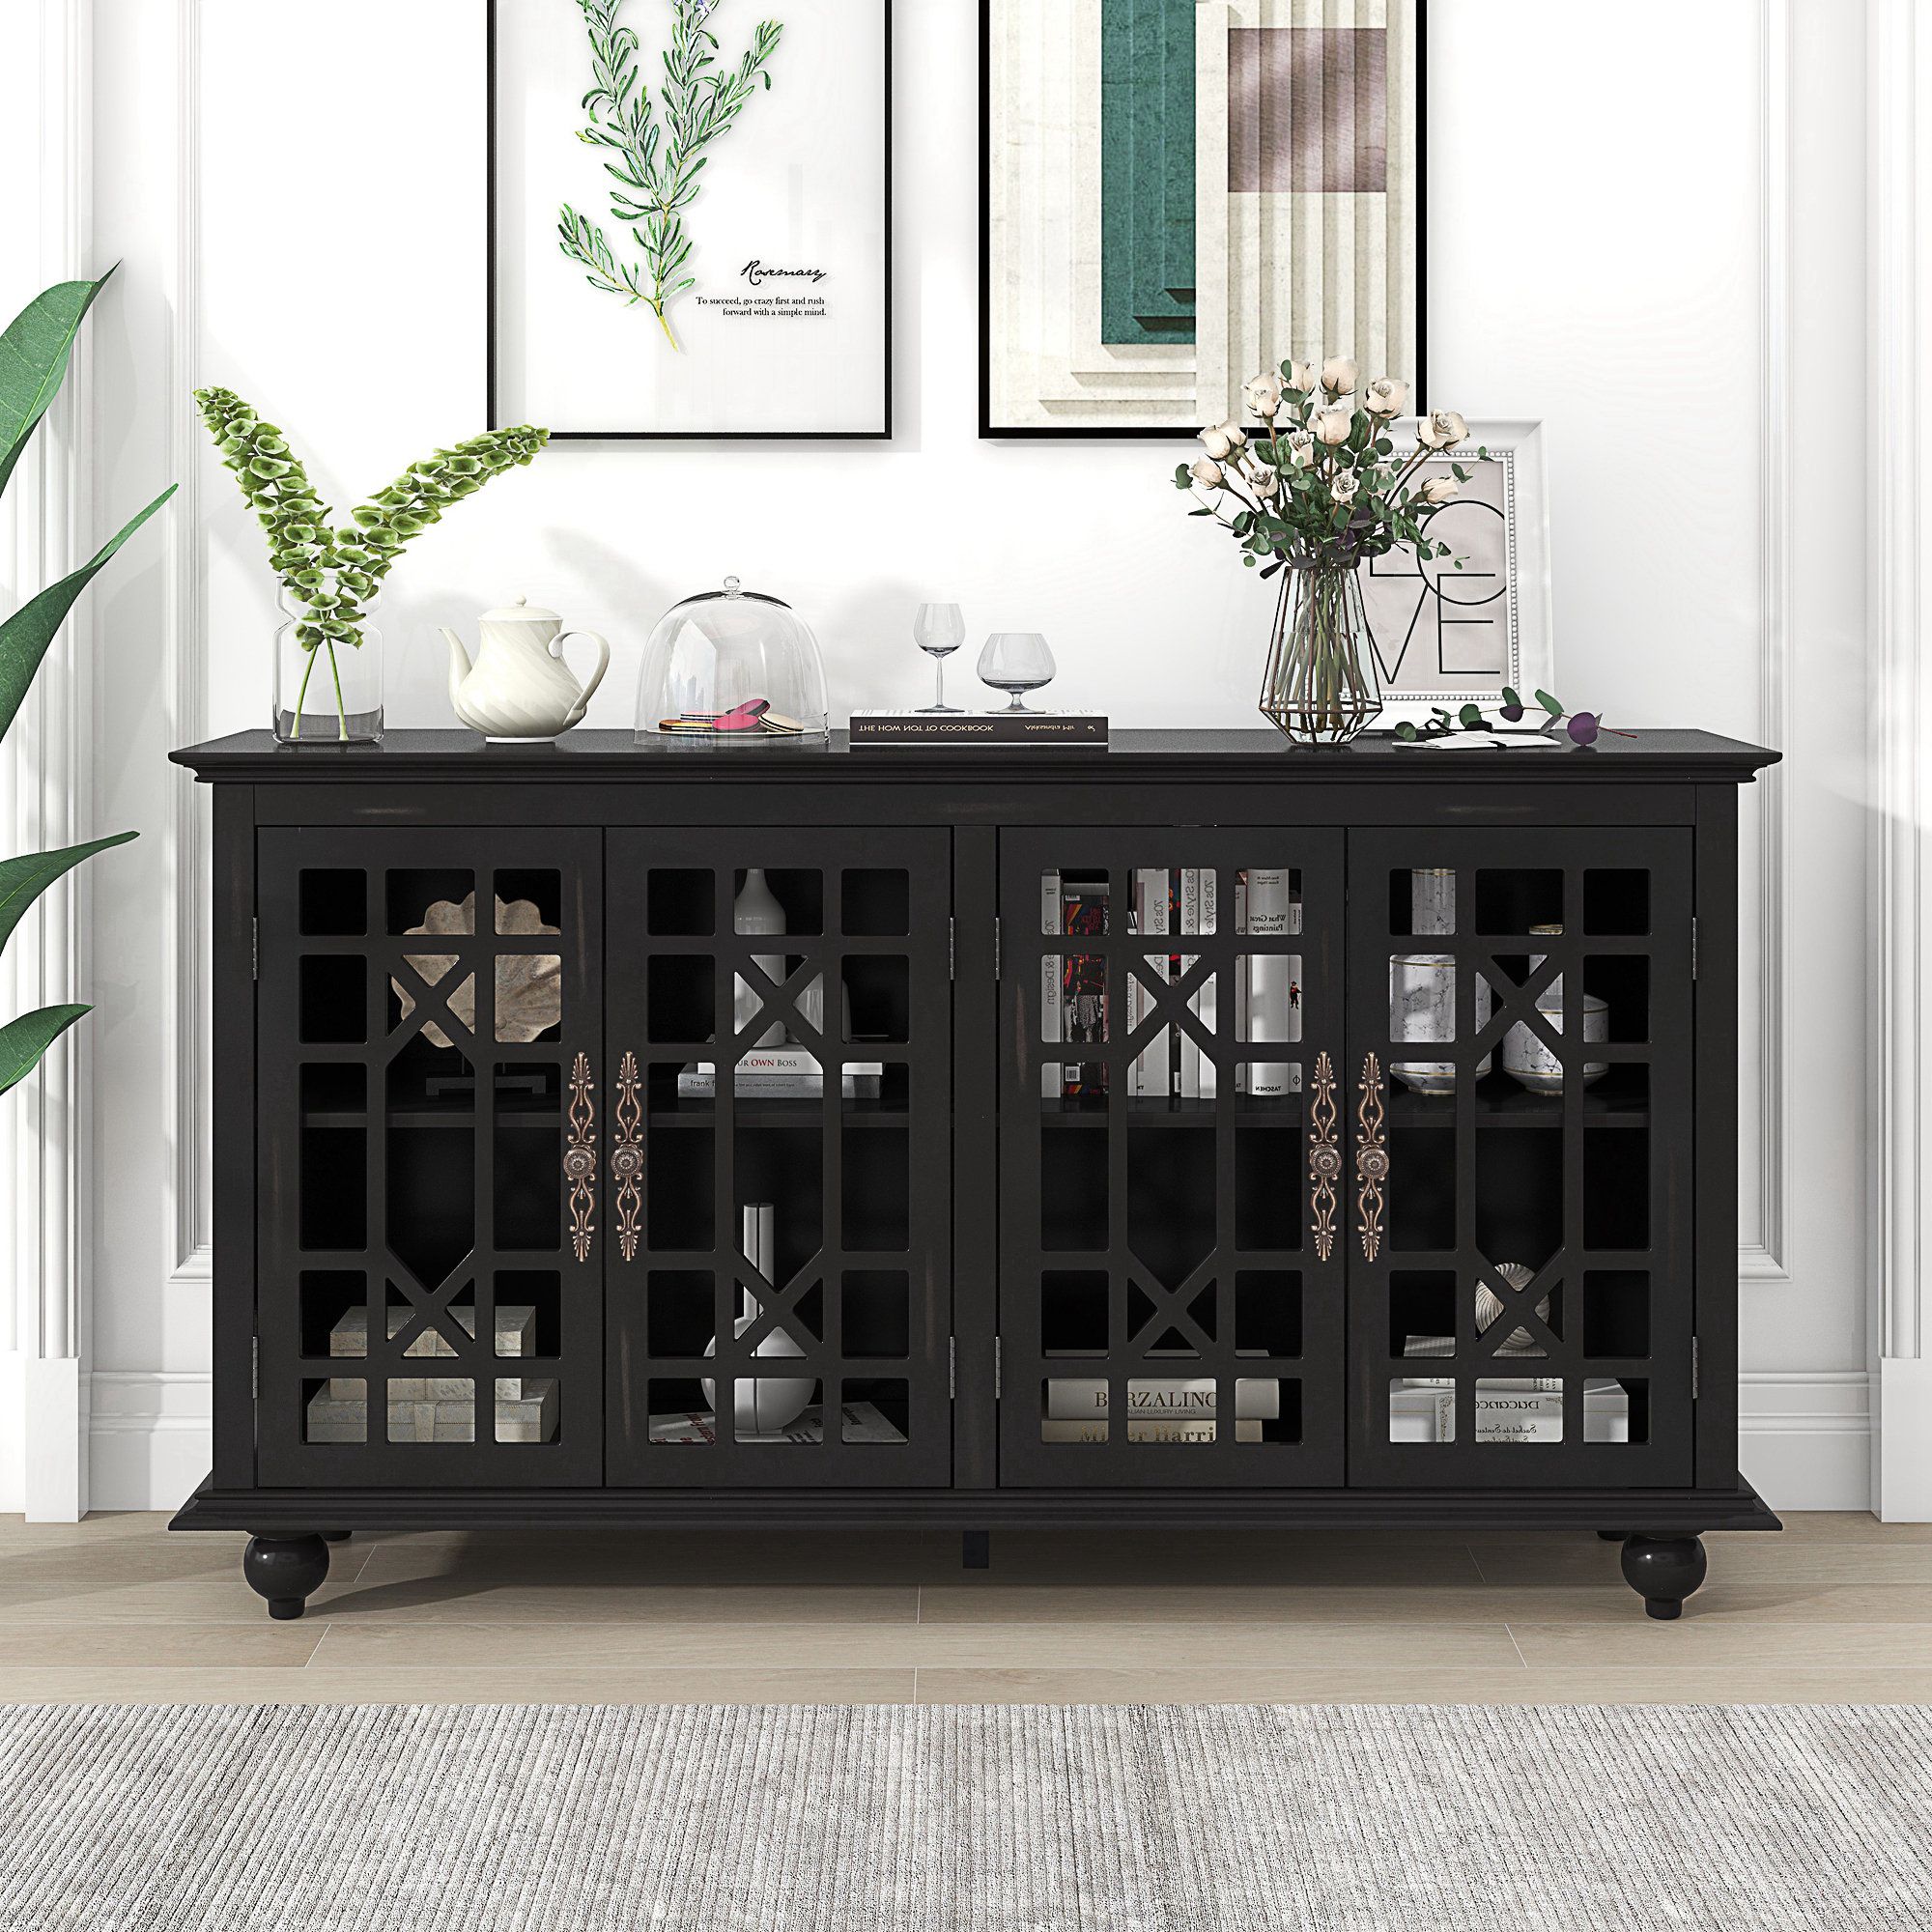 Alcott Hill® Attenweiler 60" Wide Sideboards And Buffets,credenza, Buffet  Table With Adjustable Height Shelves | Wayfair Inside Sideboards With Adjustable Shelves (View 7 of 15)